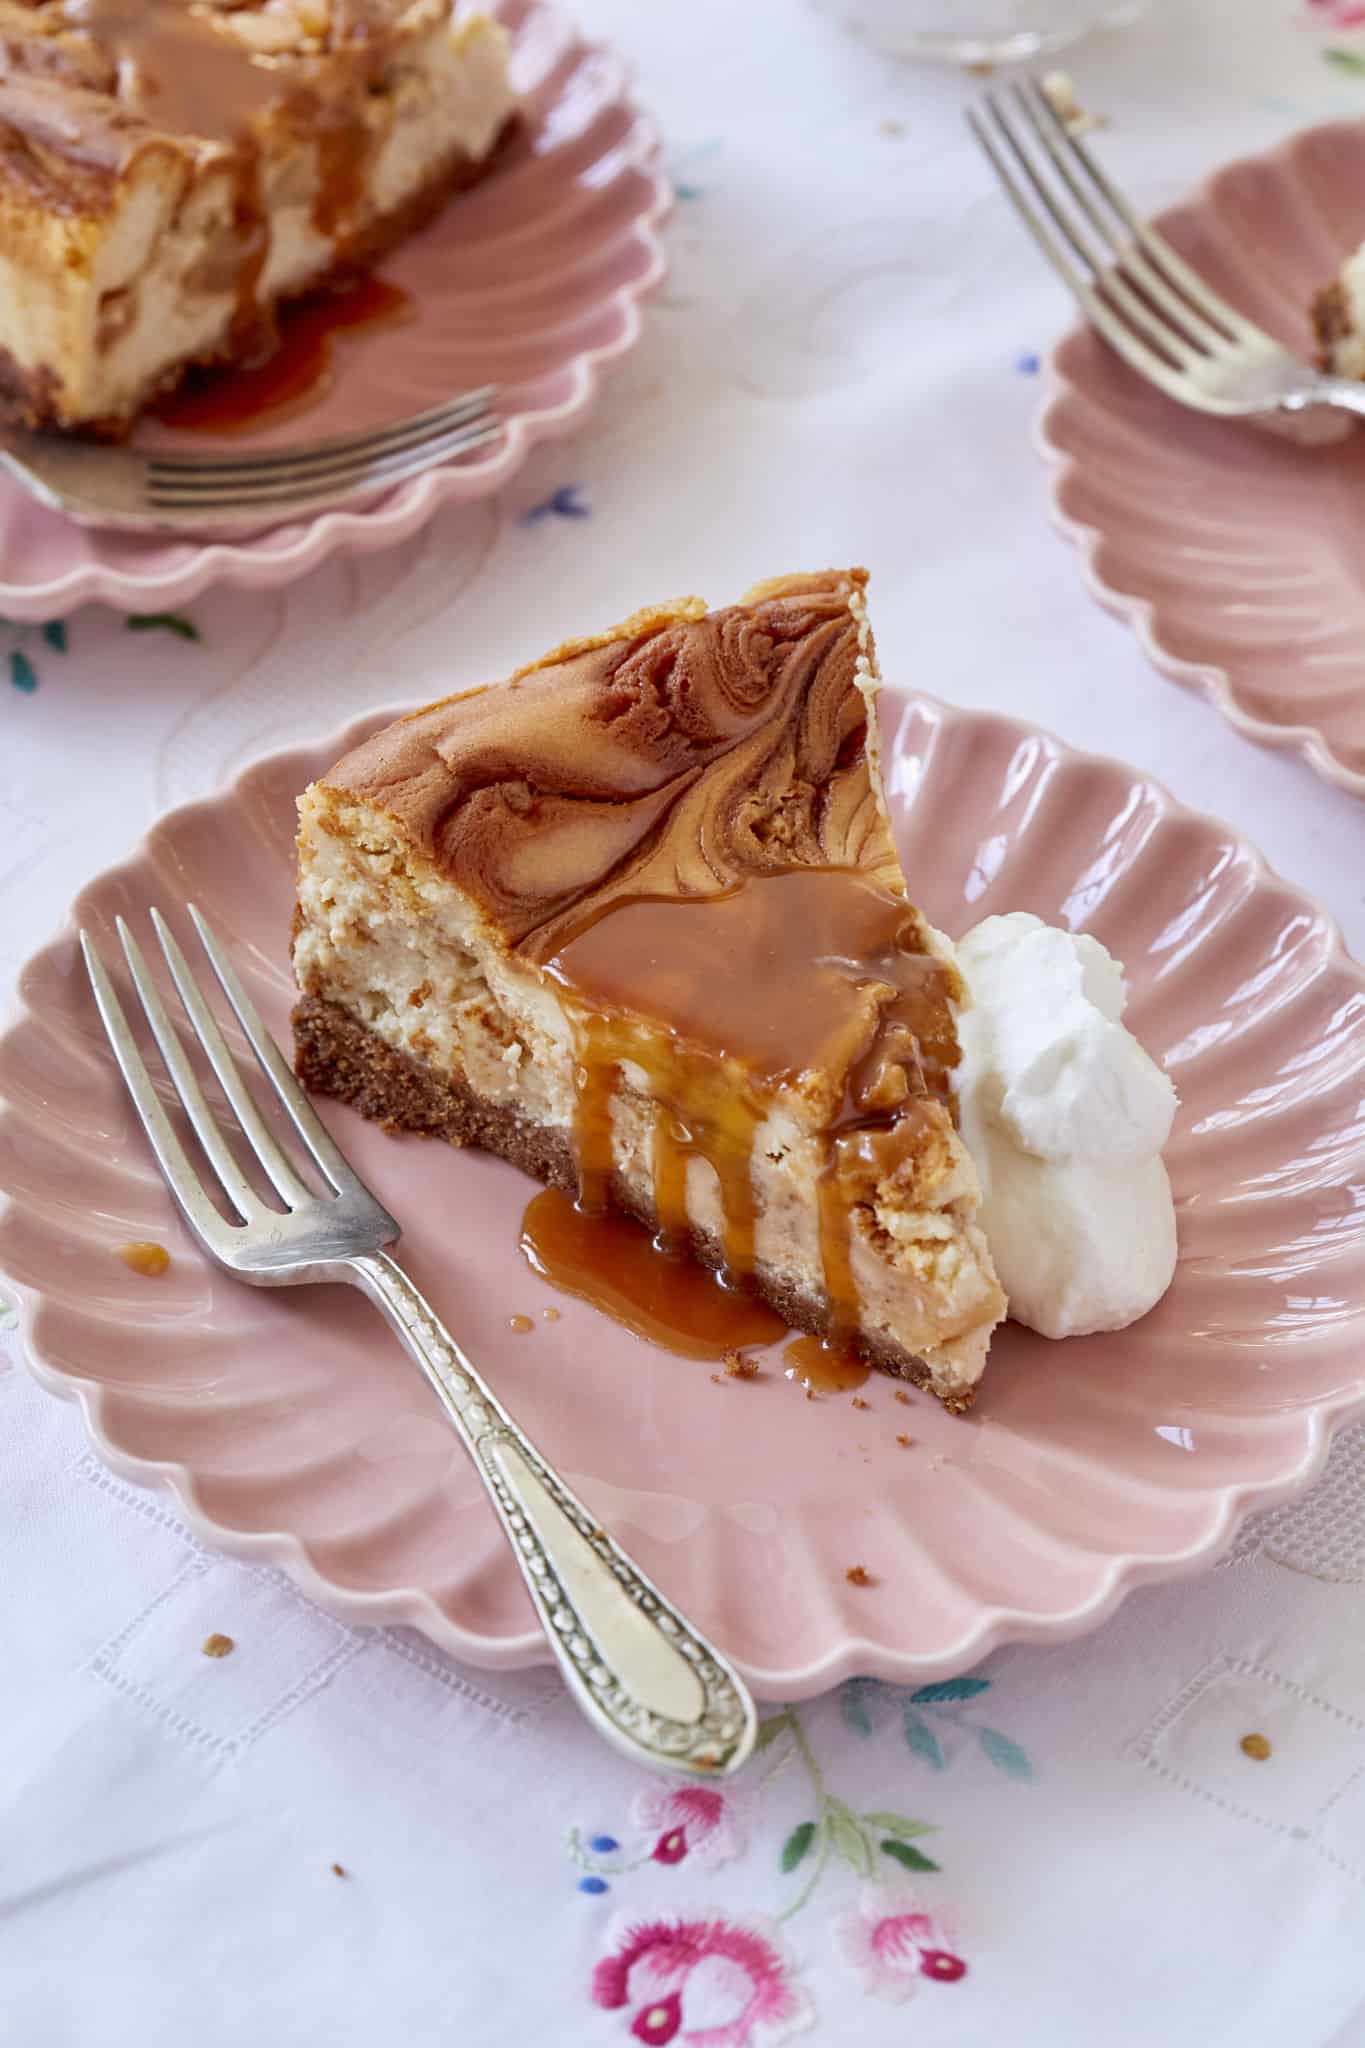 Decadent Caramel Apple Cheesecake is served on pink scallop-edged plates. It has buttery, crumbly graham cracker crust at the bottom, silly rich filling in the middle with a swirly top. It's paired with caramel sauce and a dollop of whipped cream. 